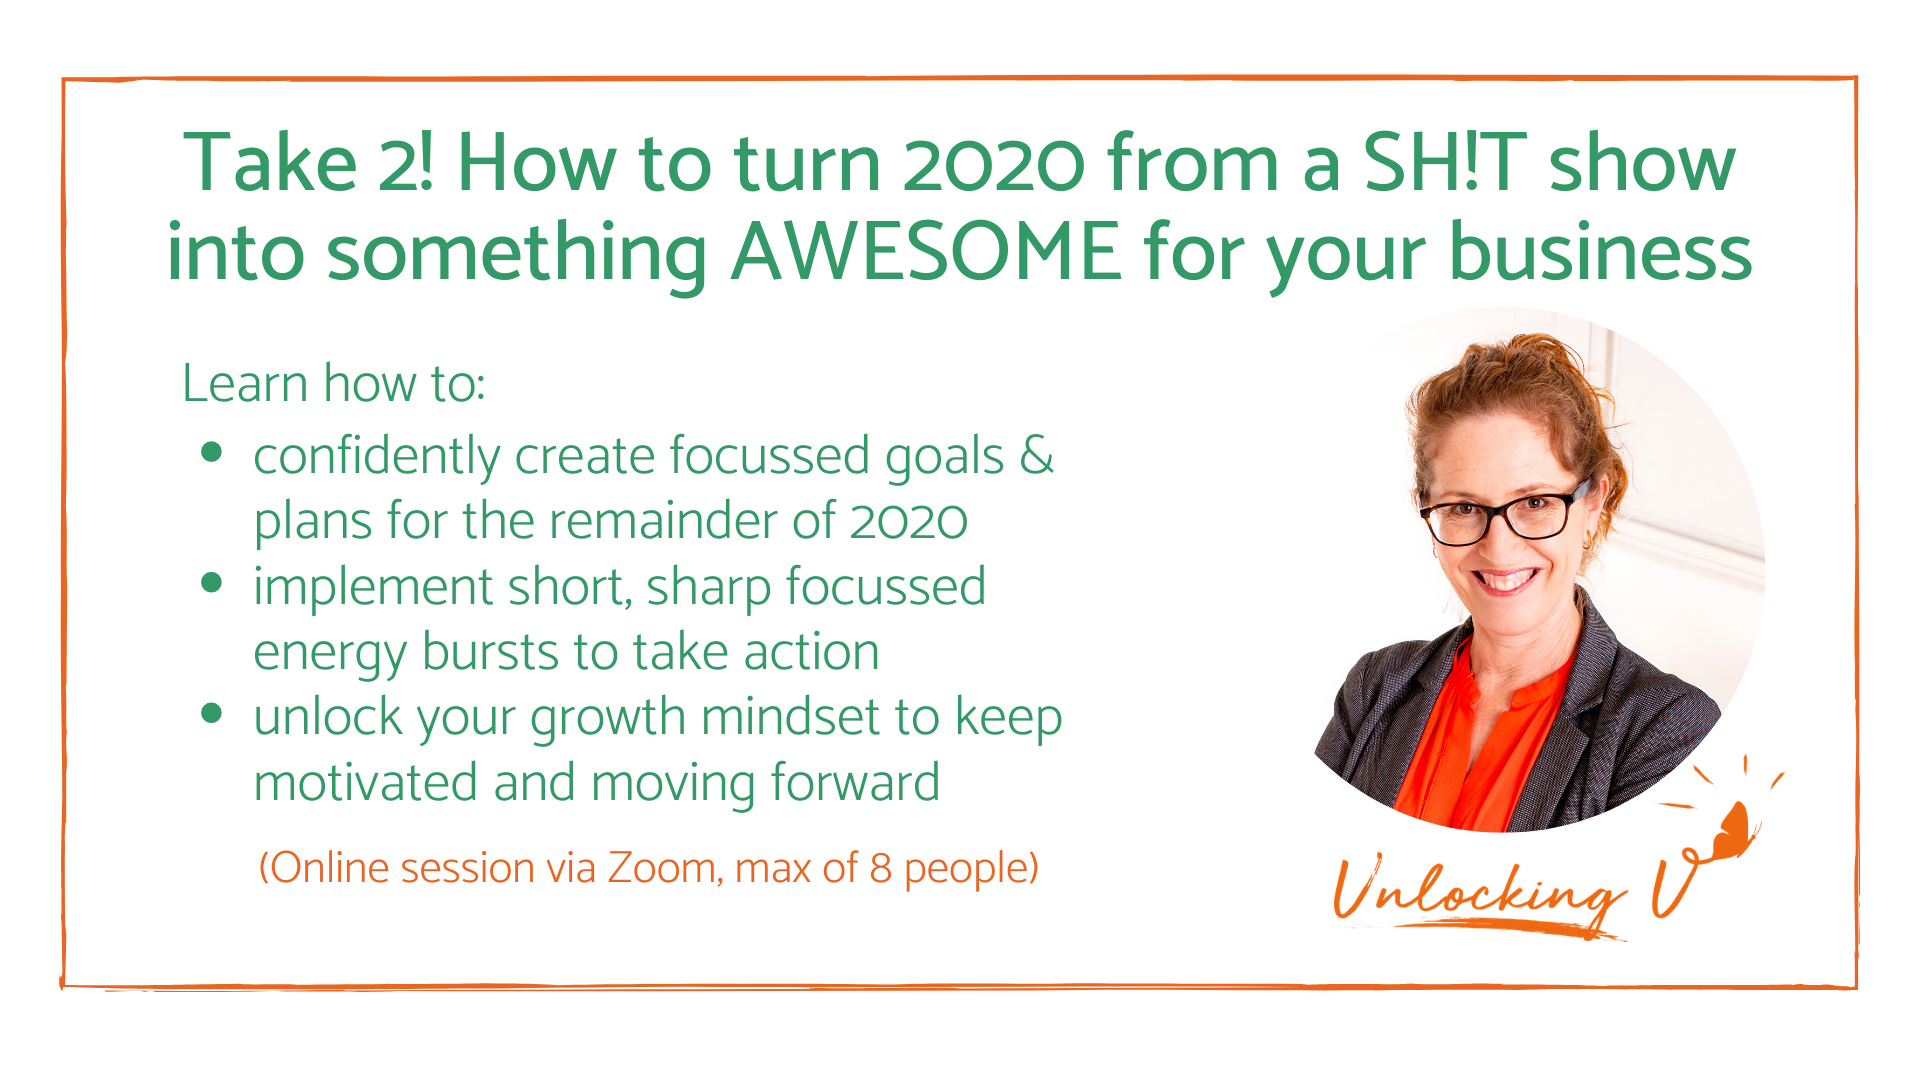 Take 2! How to turn 2020 from a Sh!tshow into something AWESOME!